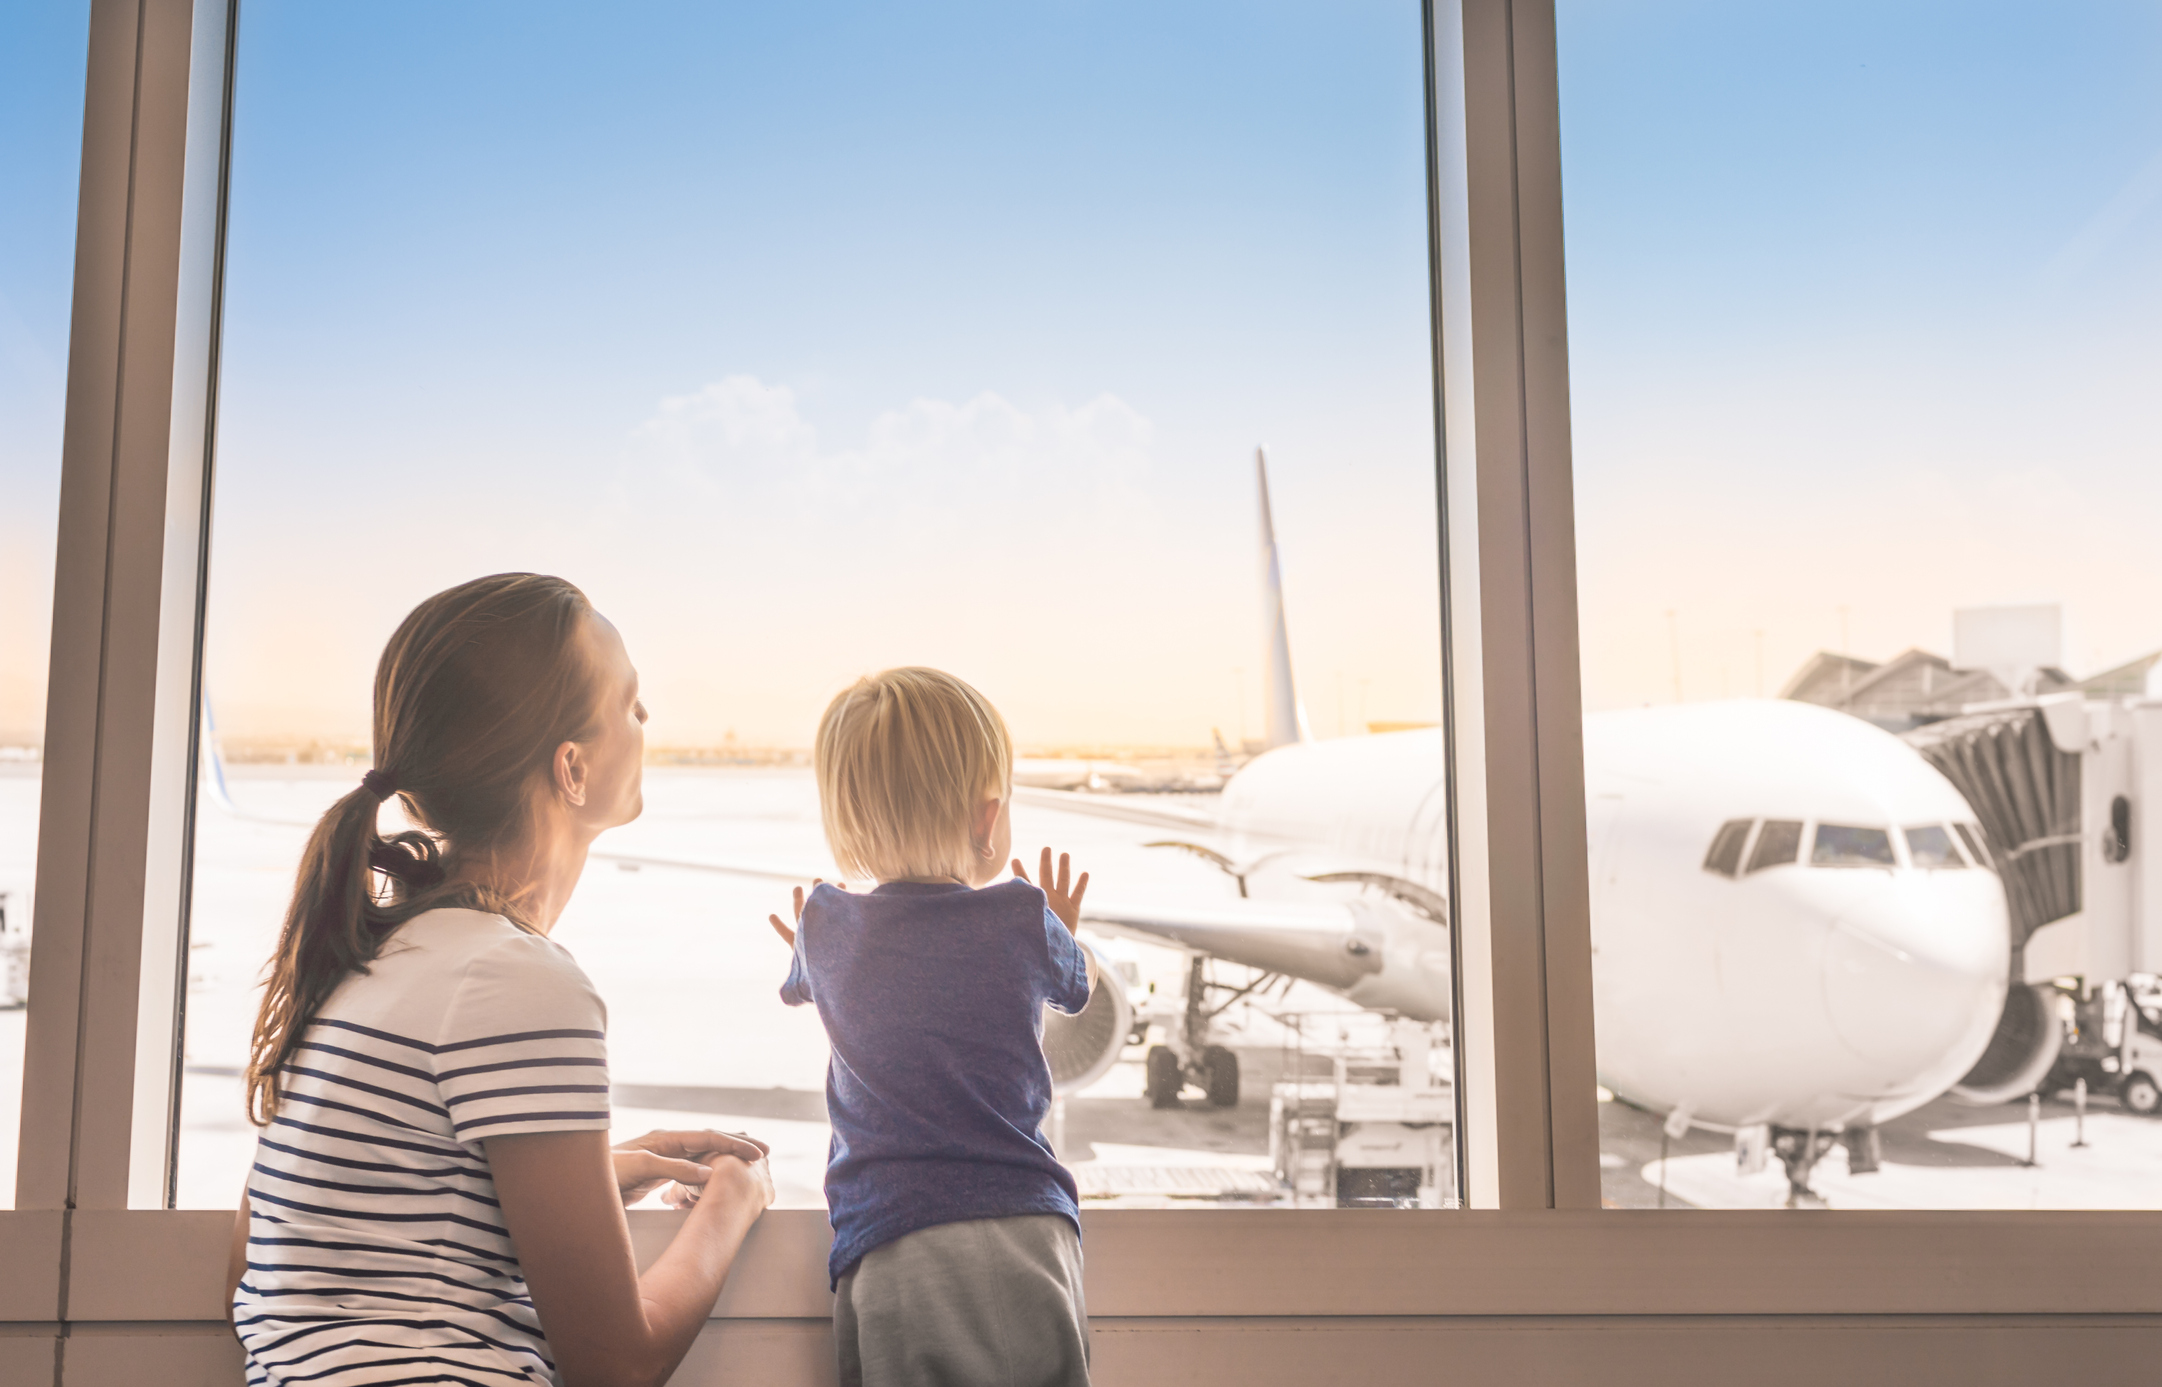 Mother with toddler at airport window